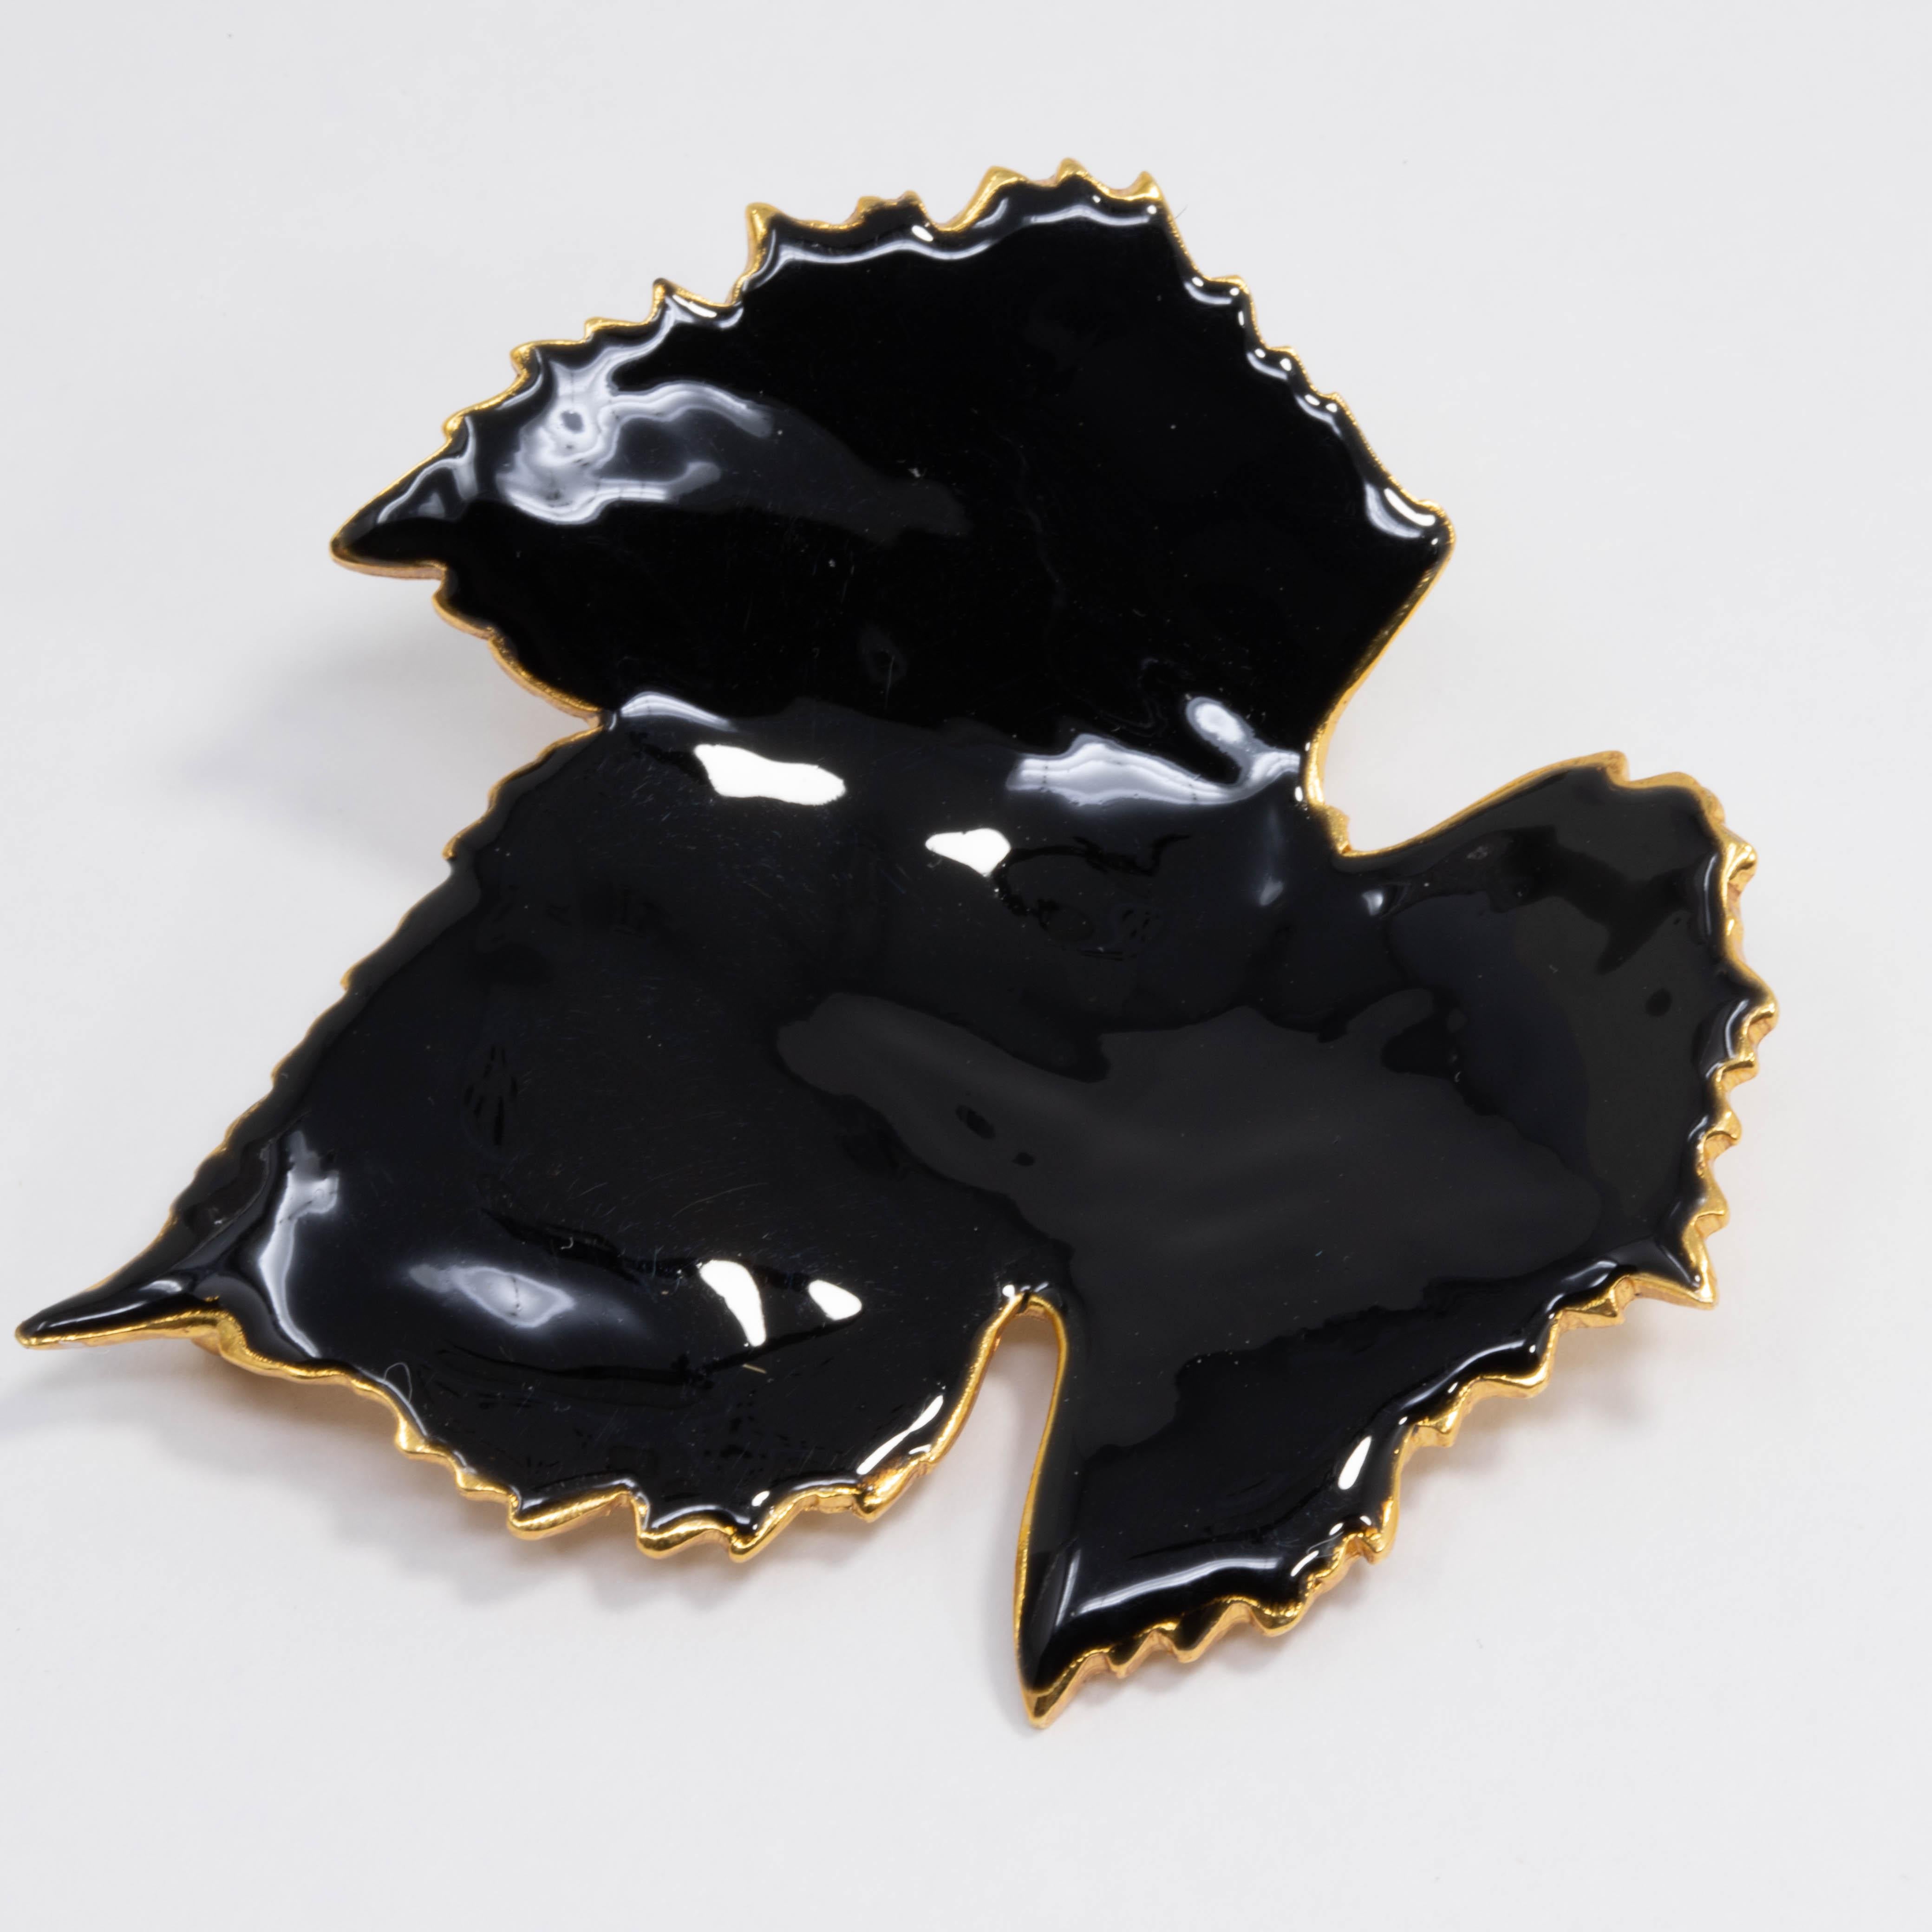 A golden grape vine leaf painted with glossy black enamel.

Gold plated. Pin brooch by Oscar de la Renta

Tags, Marks, Hallmarks: Oscar de la Renta, Made in USA